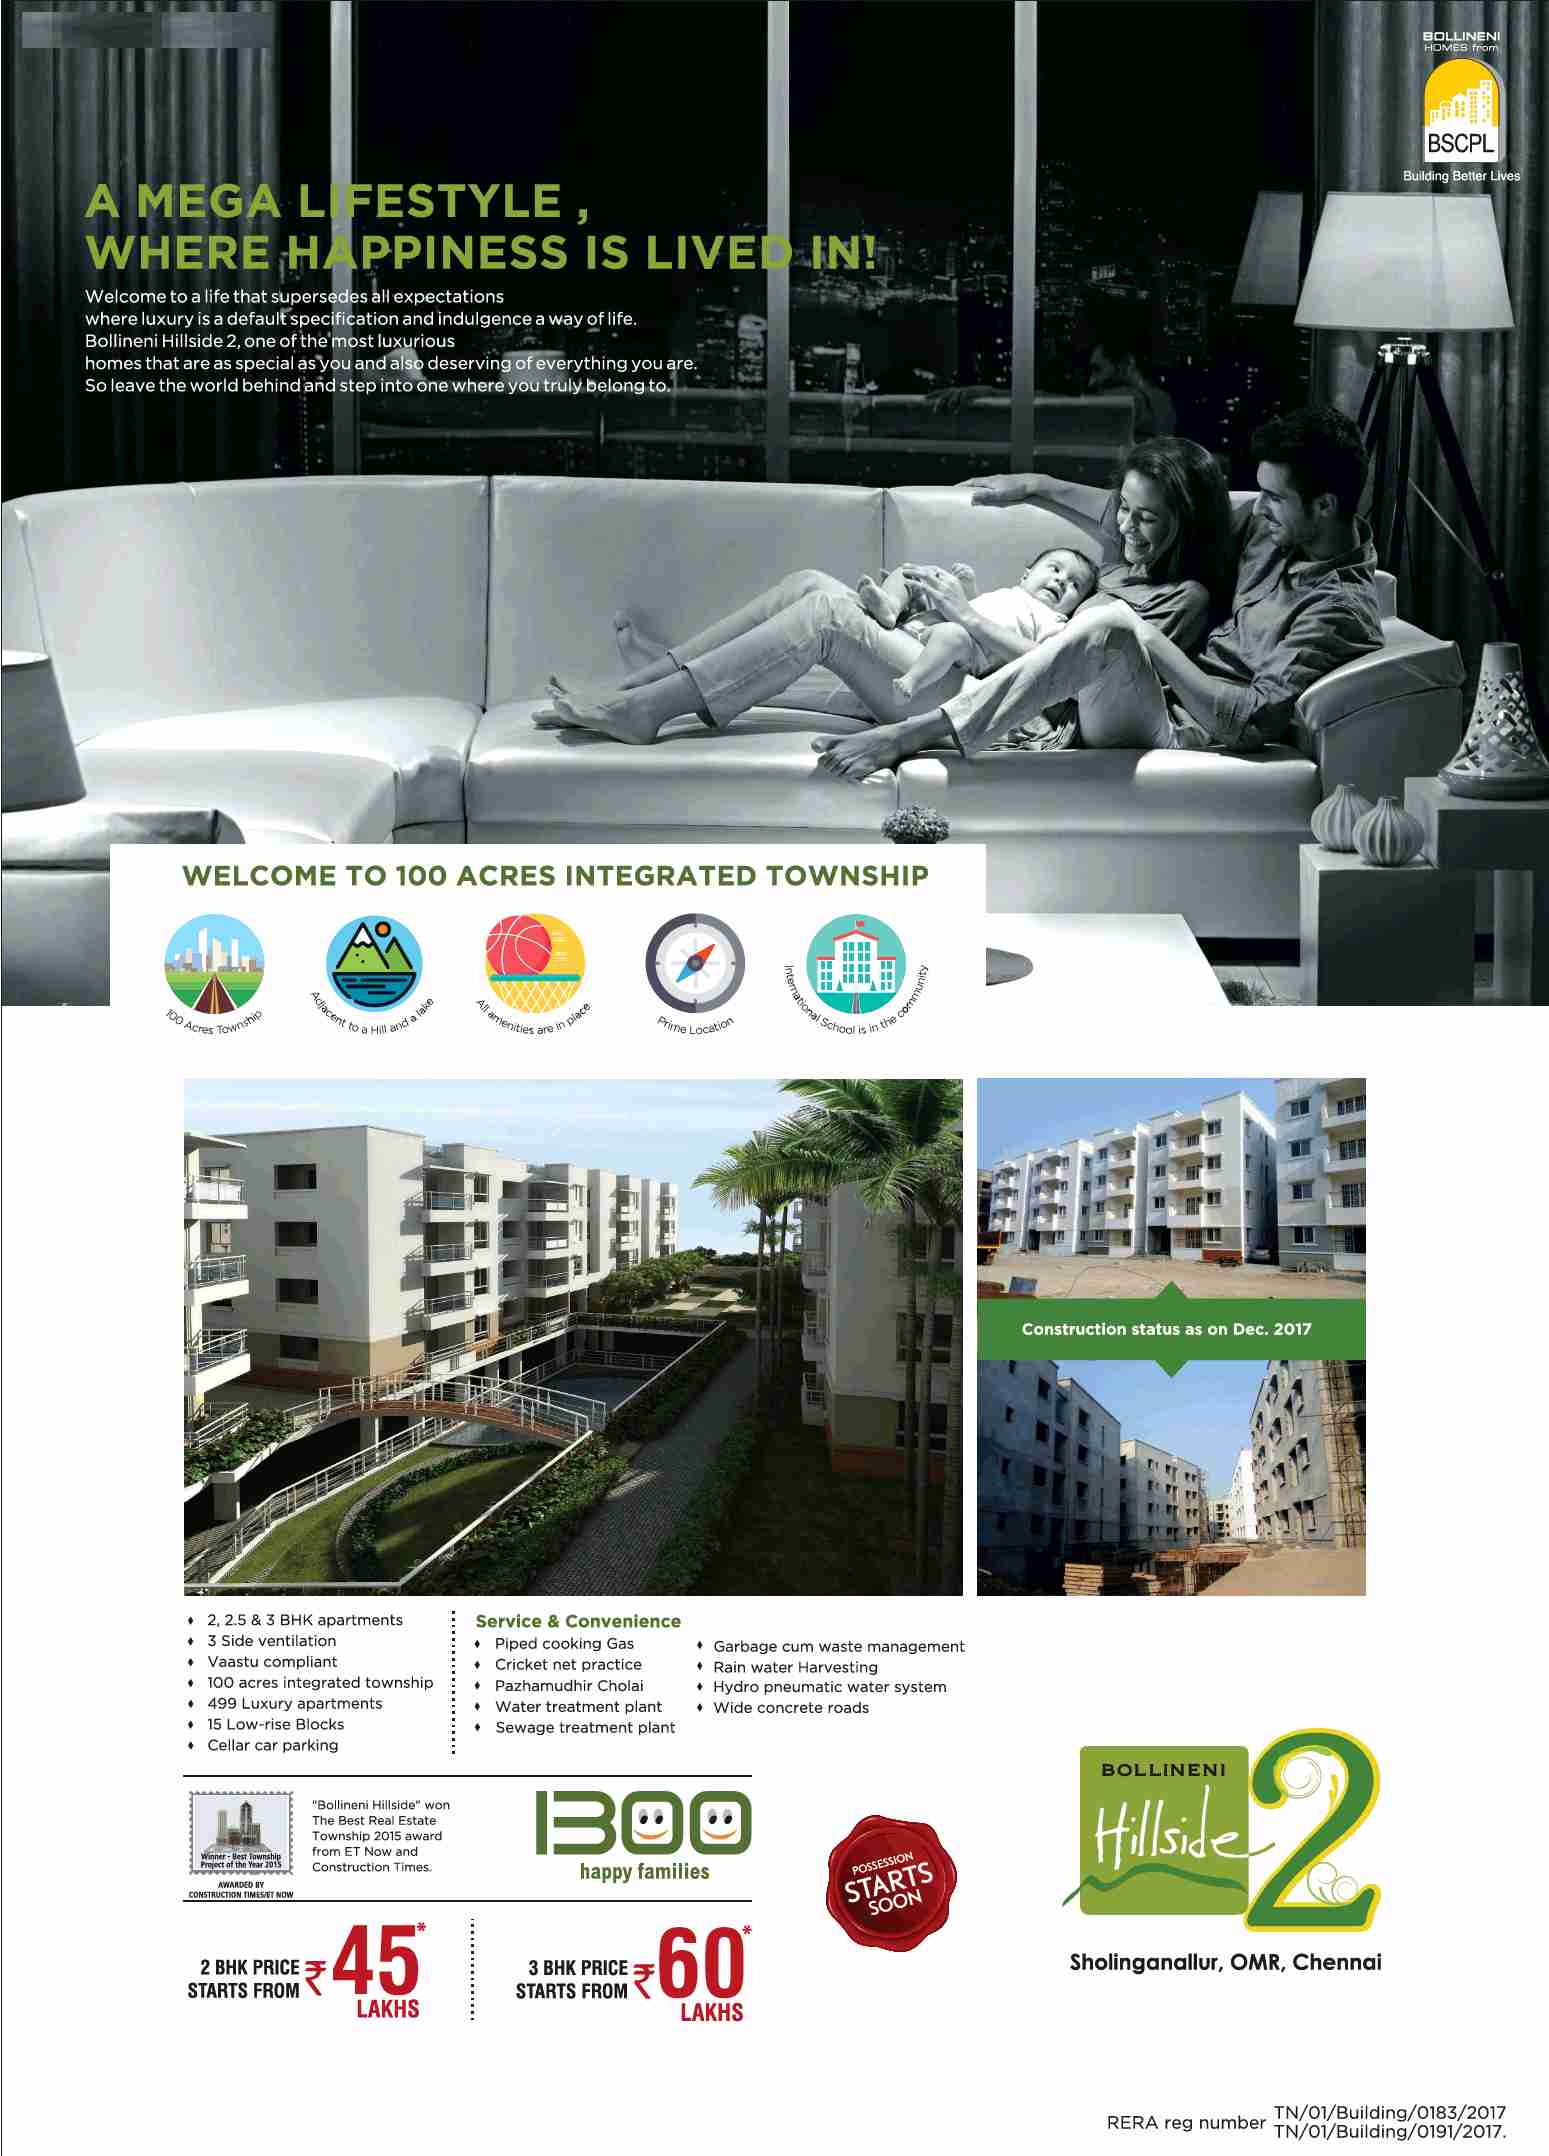 Live a mega lifestyle where happiness is lived in at BSCPL Bollineni Hillside in Chennai Update